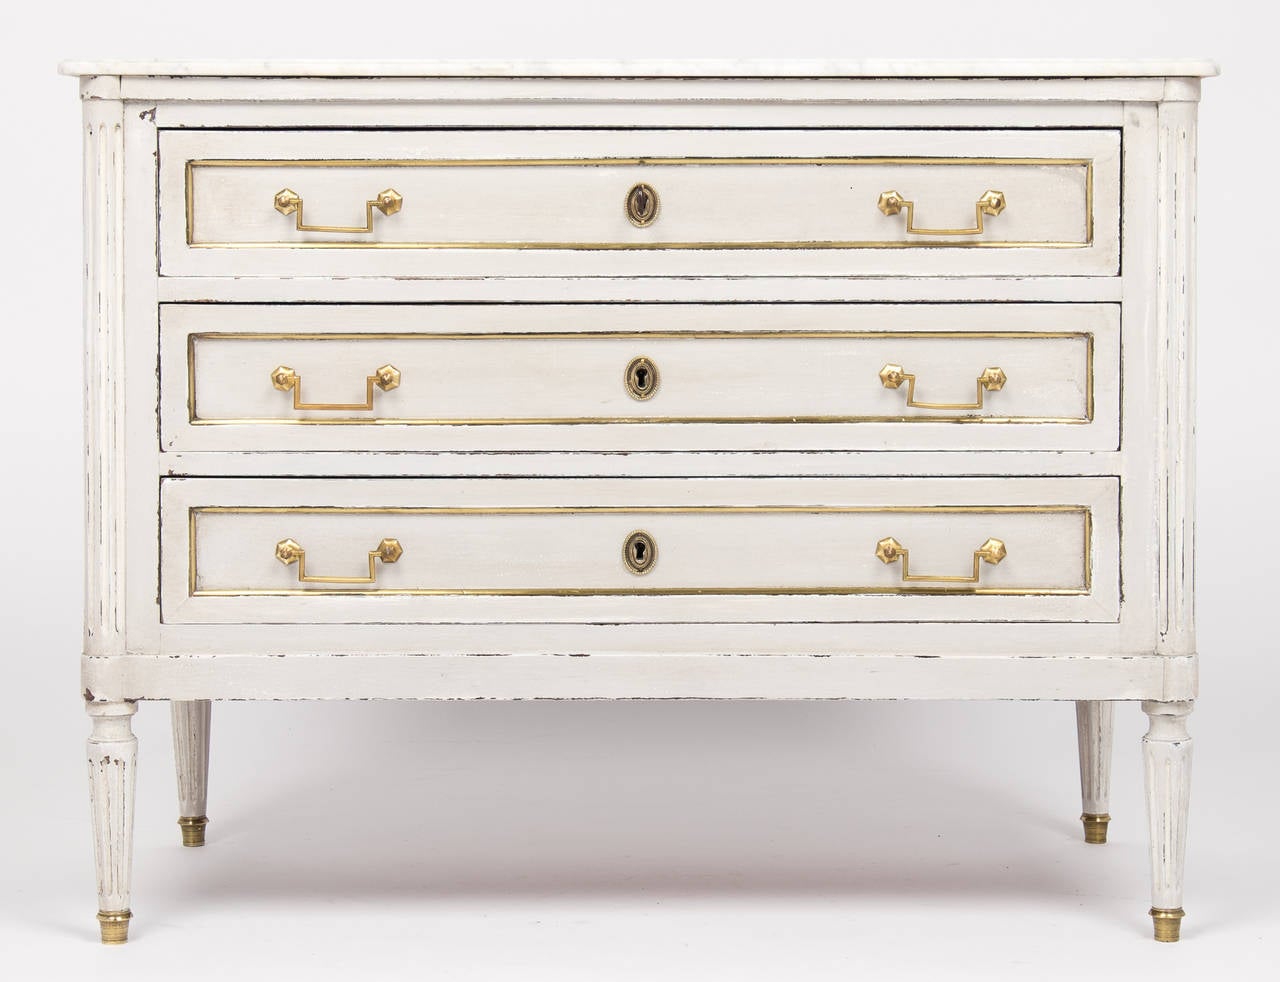 Louis XVI style hand-painted chest topped with beautiful Carrara marble. Three dovetailed drawers, brass trim on all sides and fluted legs. A charming French antique chest.